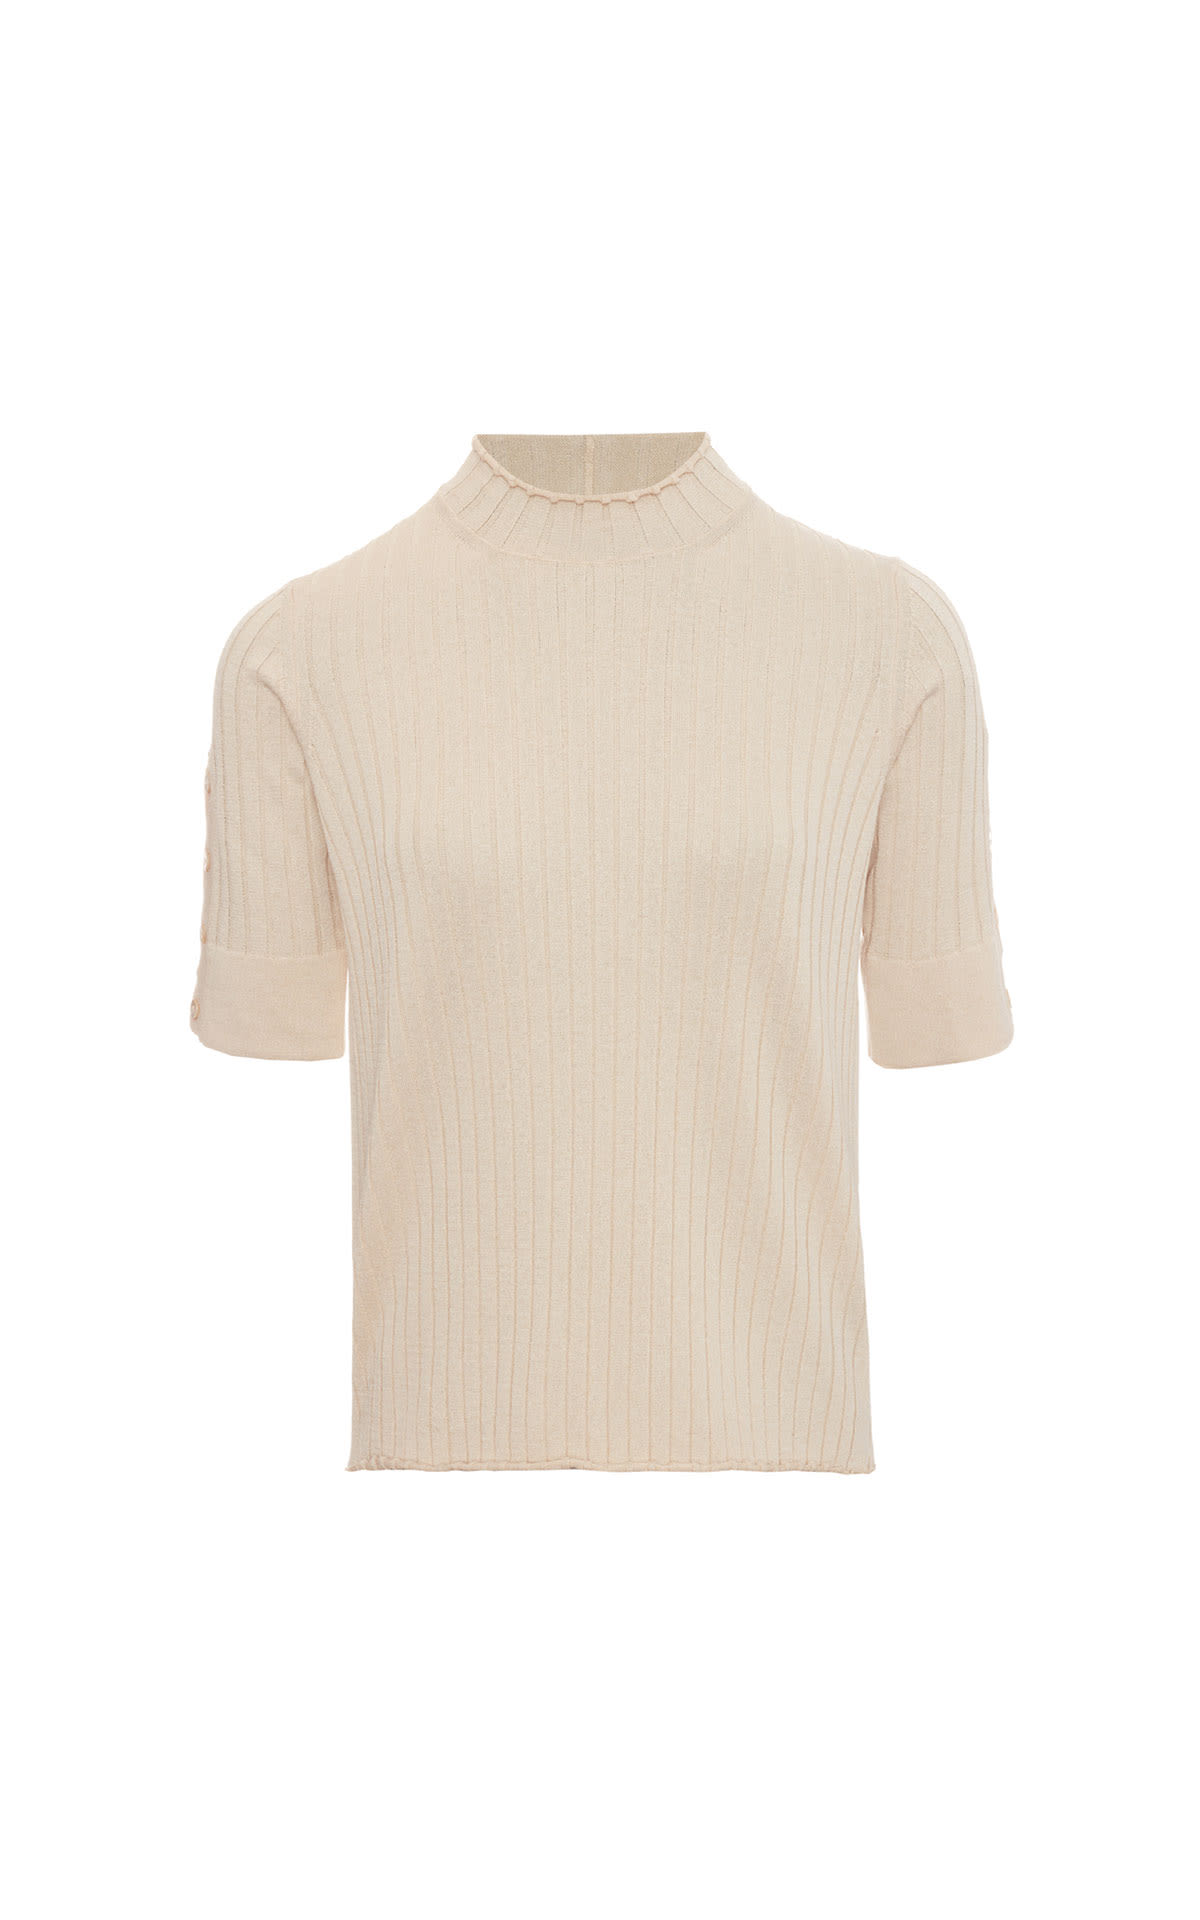 Eleventy Cotton tee shirt sweater womens from Bicester Village